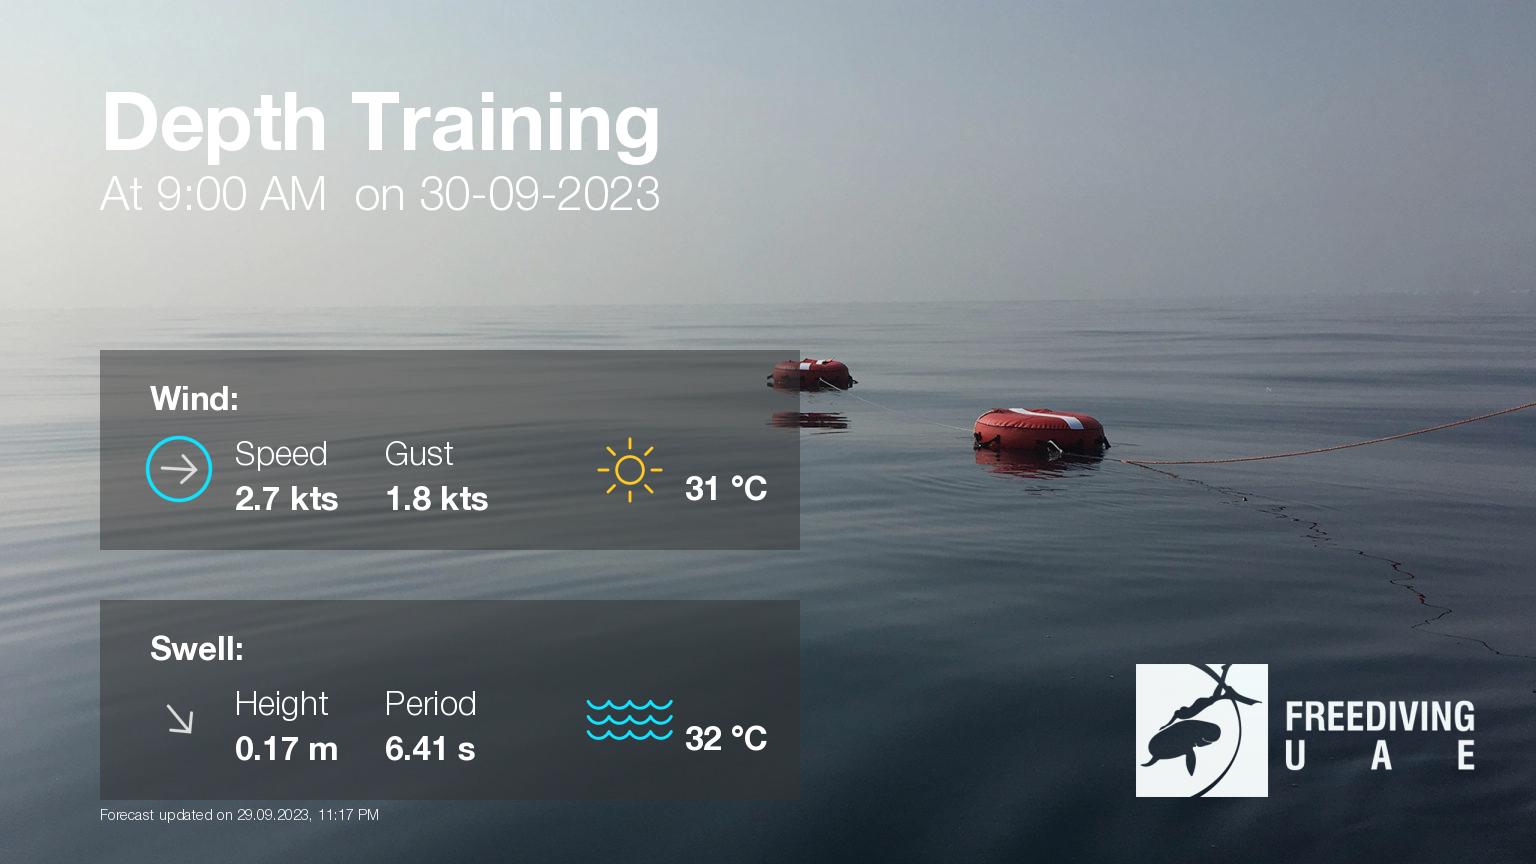 Expected weather during Depth Training on Sat, Sep 30, at 9:00 AM